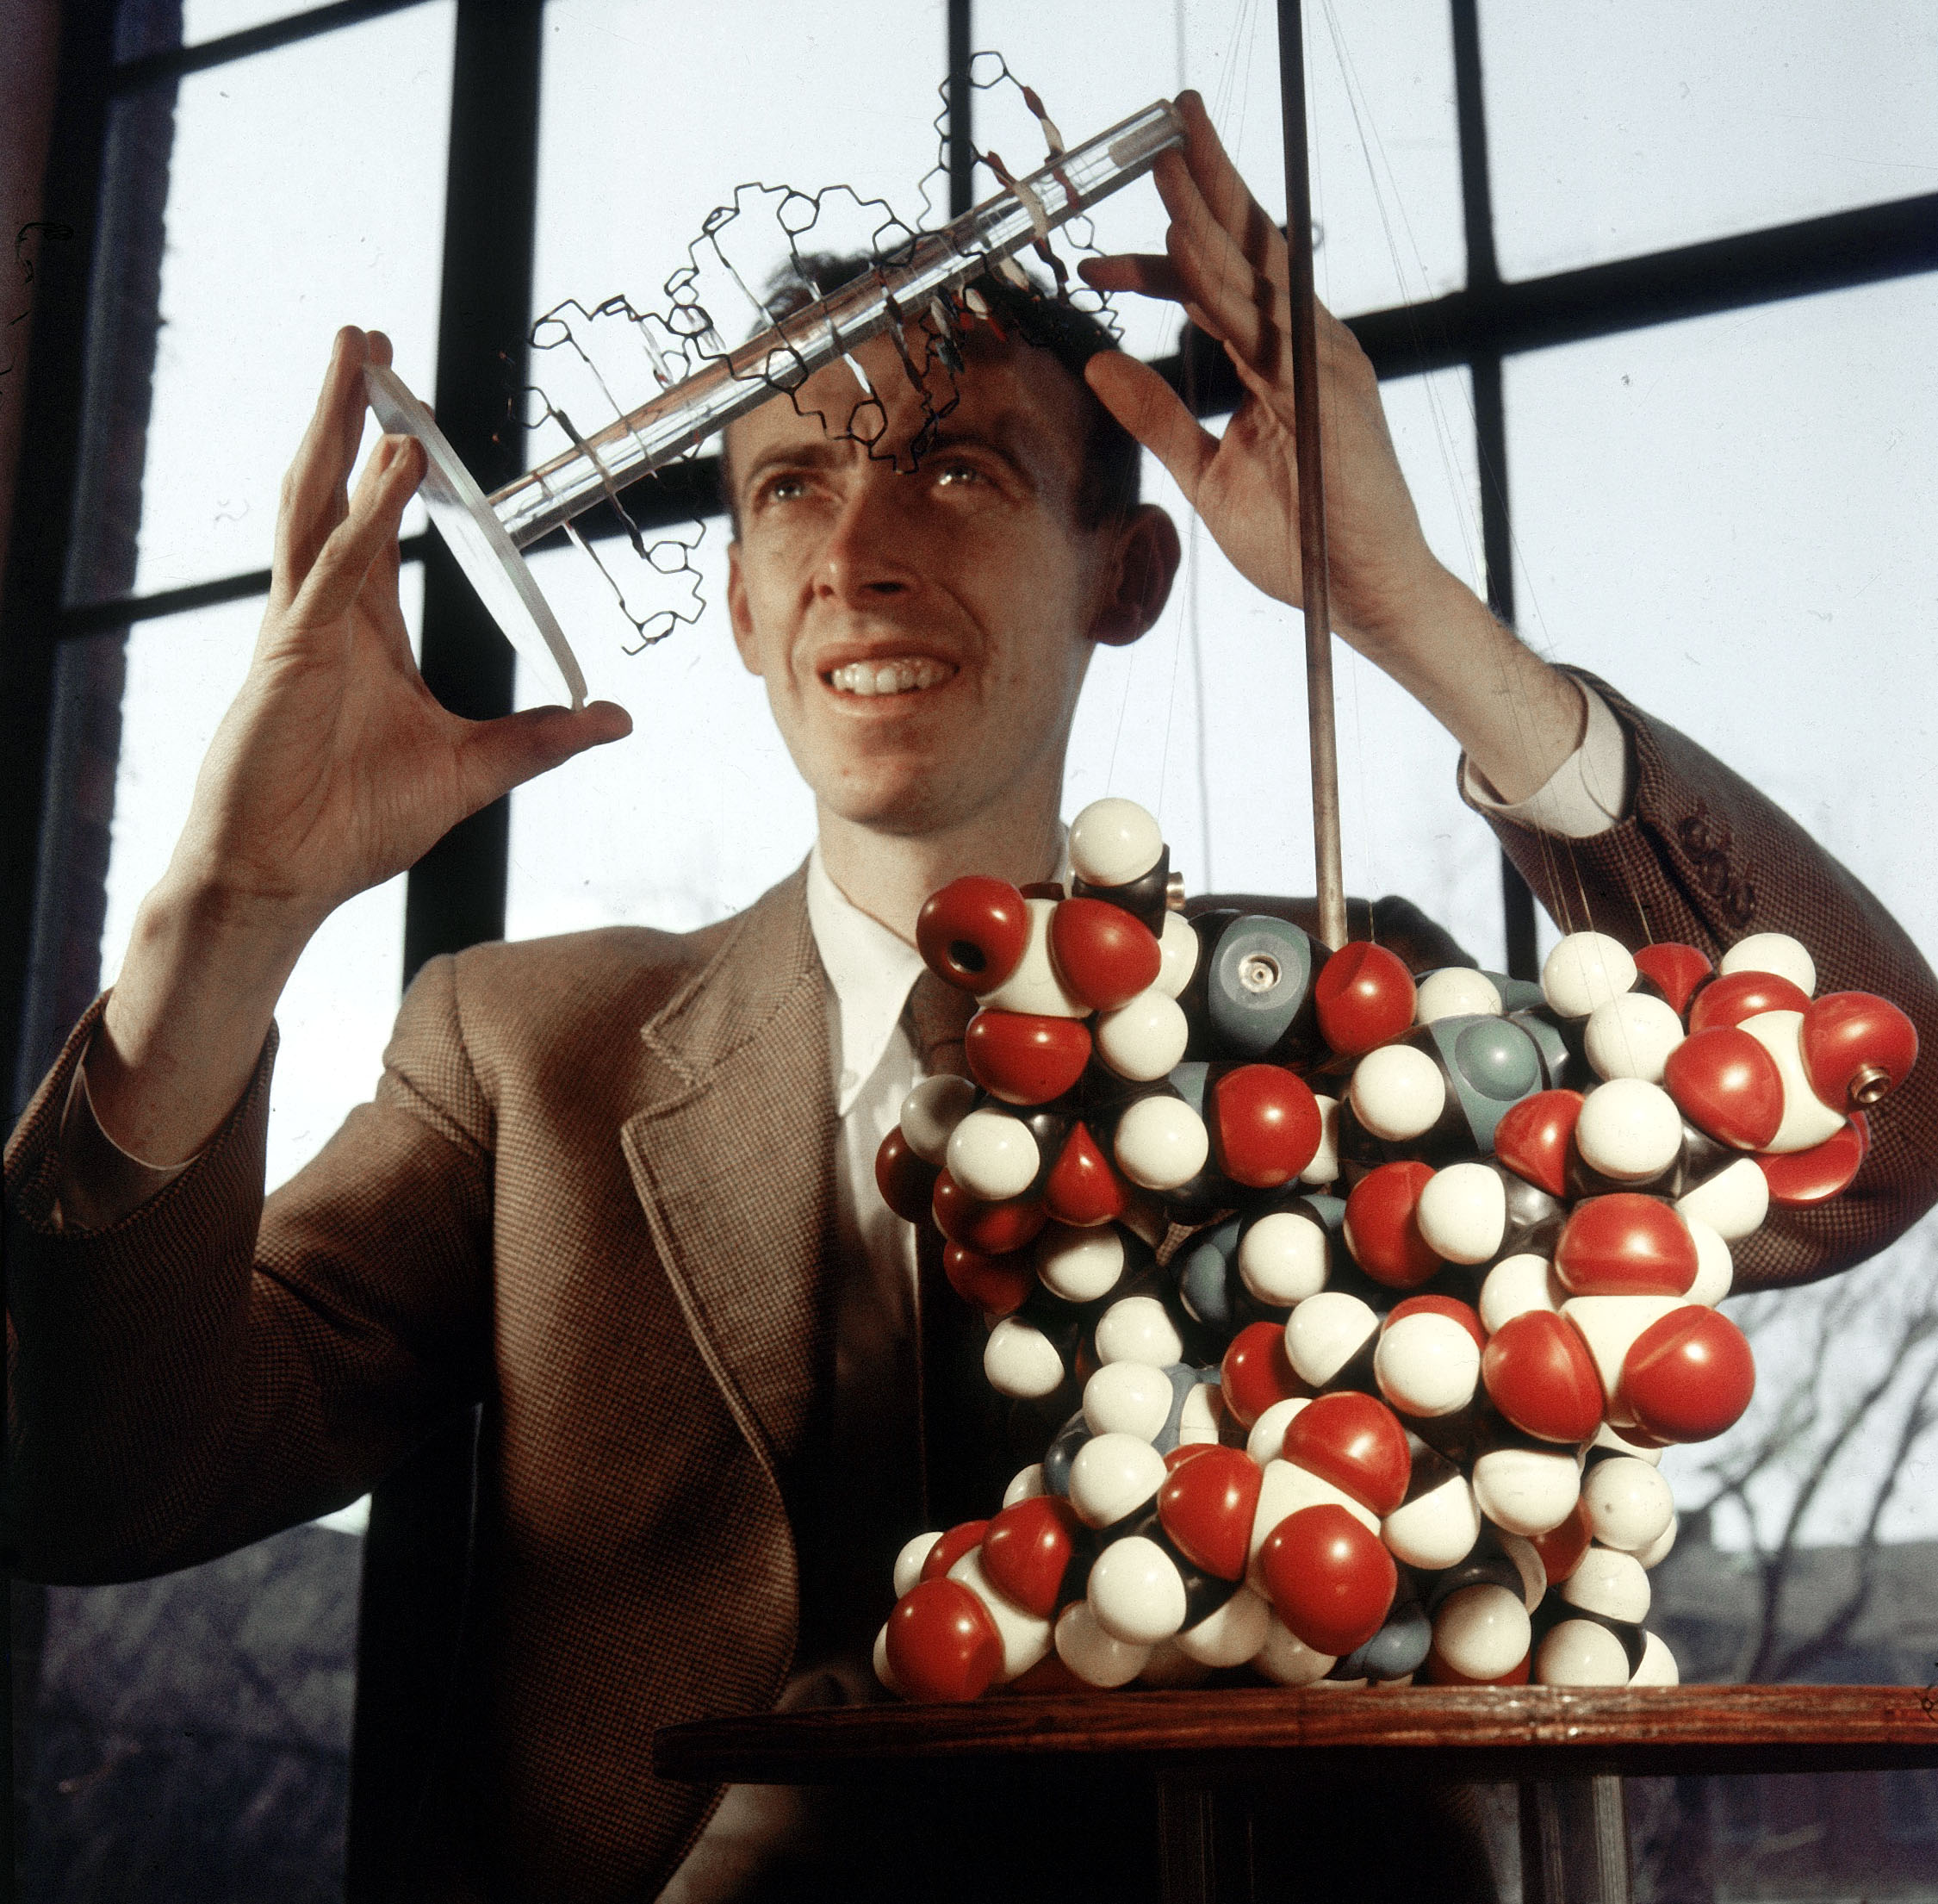 Geneticist and biologist James Watson wins Nobel Prize for the co-discovery of the structure of DNA.